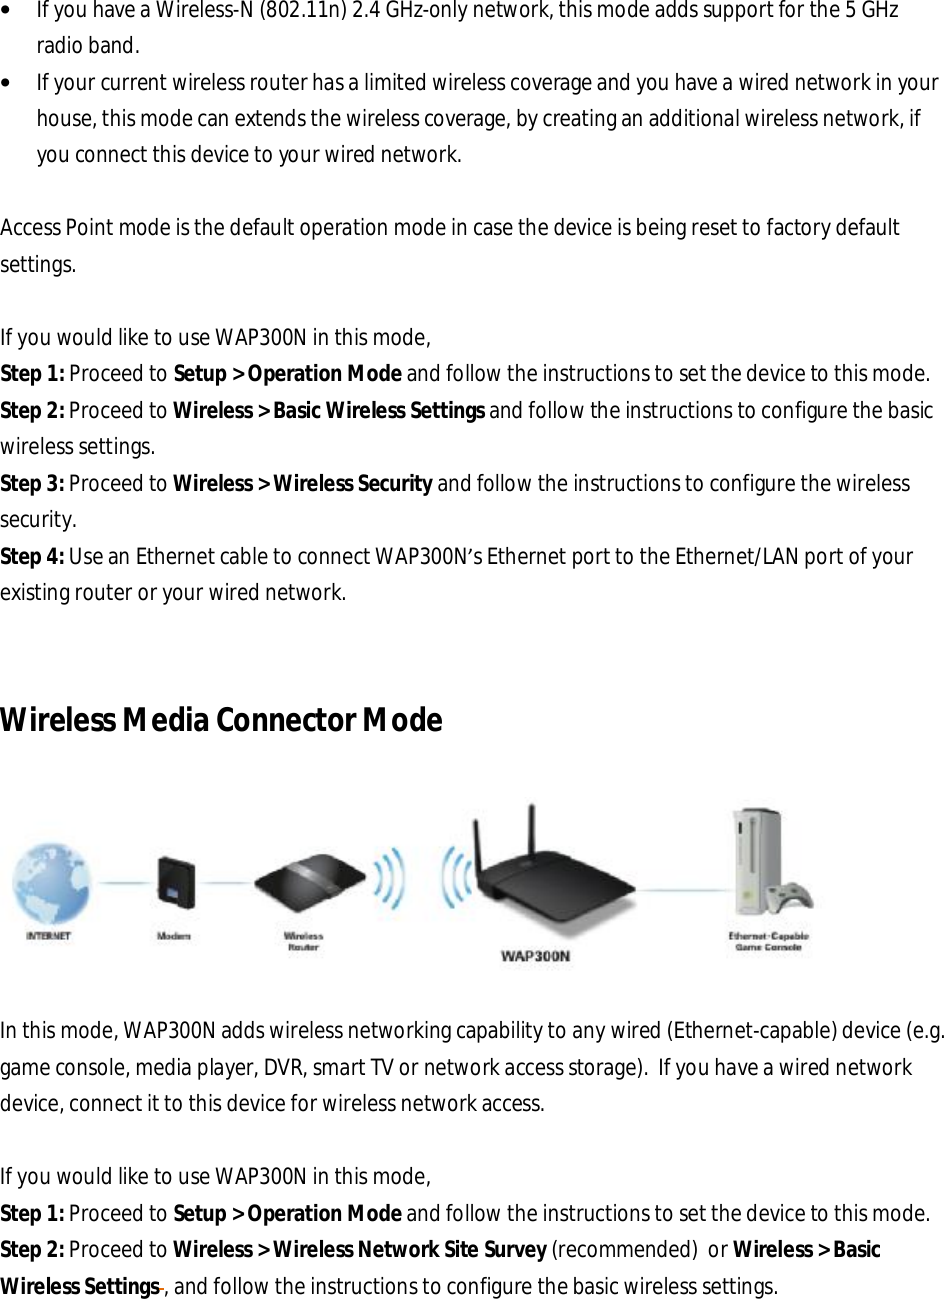 • If you have a Wireless-N (802.11n) 2.4 GHz-only network, this mode adds support for the 5 GHz radio band. • If your current wireless router has a limited wireless coverage and you have a wired network in your house, this mode can extends the wireless coverage, by creating an additional wireless network, if you connect this device to your wired network.   Access Point mode is the default operation mode in case the device is being reset to factory default settings.  If you would like to use WAP300N in this mode, Step 1: Proceed to Setup &gt; Operation Mode and follow the instructions to set the device to this mode. Step 2: Proceed to Wireless &gt; Basic Wireless Settings and follow the instructions to configure the basic wireless settings. Step 3: Proceed to Wireless &gt; Wireless Security and follow the instructions to configure the wireless security. Step 4: Use an Ethernet cable to connect WAP300N’s Ethernet port to the Ethernet/LAN port of your existing router or your wired network.    Wireless Media Connector Mode    In this mode, WAP300N adds wireless networking capability to any wired (Ethernet-capable) device (e.g. game console, media player, DVR, smart TV or network access storage).  If you have a wired network device, connect it to this device for wireless network access.  If you would like to use WAP300N in this mode, Step 1: Proceed to Setup &gt; Operation Mode and follow the instructions to set the device to this mode. Step 2: Proceed to Wireless &gt; Wireless Network Site Survey (recommended)  or Wireless &gt; Basic Wireless Settings , and follow the instructions to configure the basic wireless settings. 